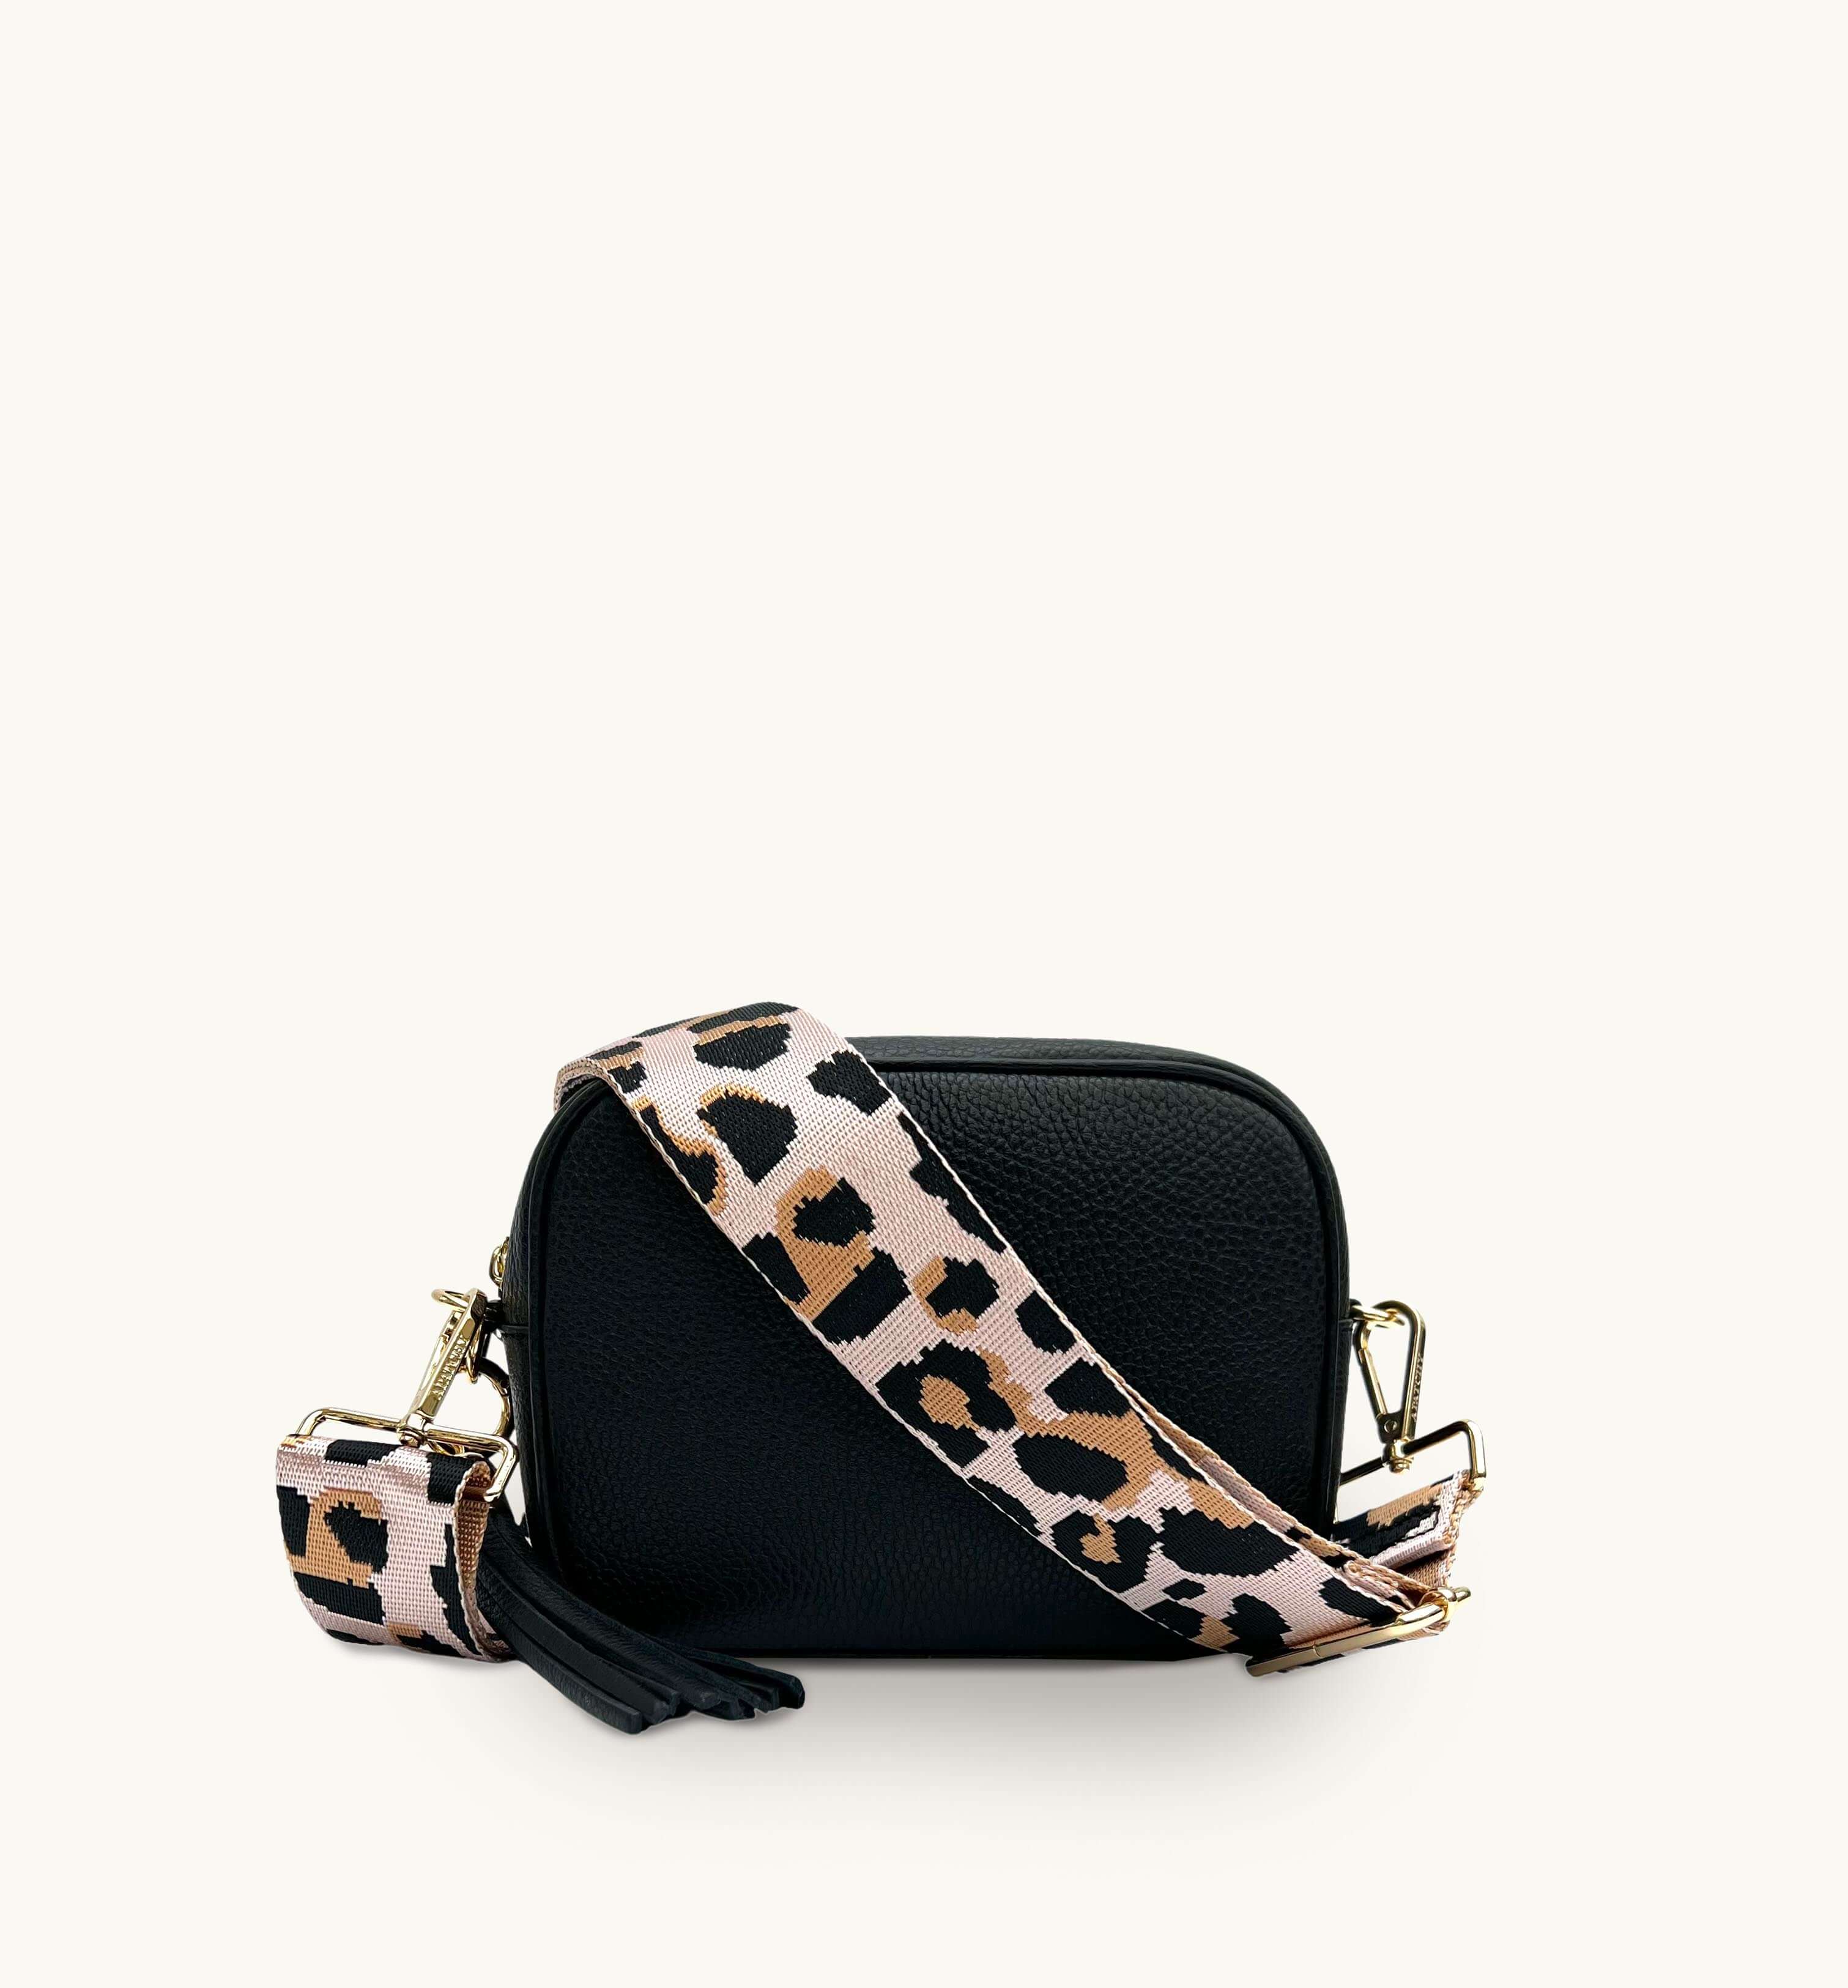 Black Leather Crossbody Bag With Pale Pink Leopard Strap – Apatchy London